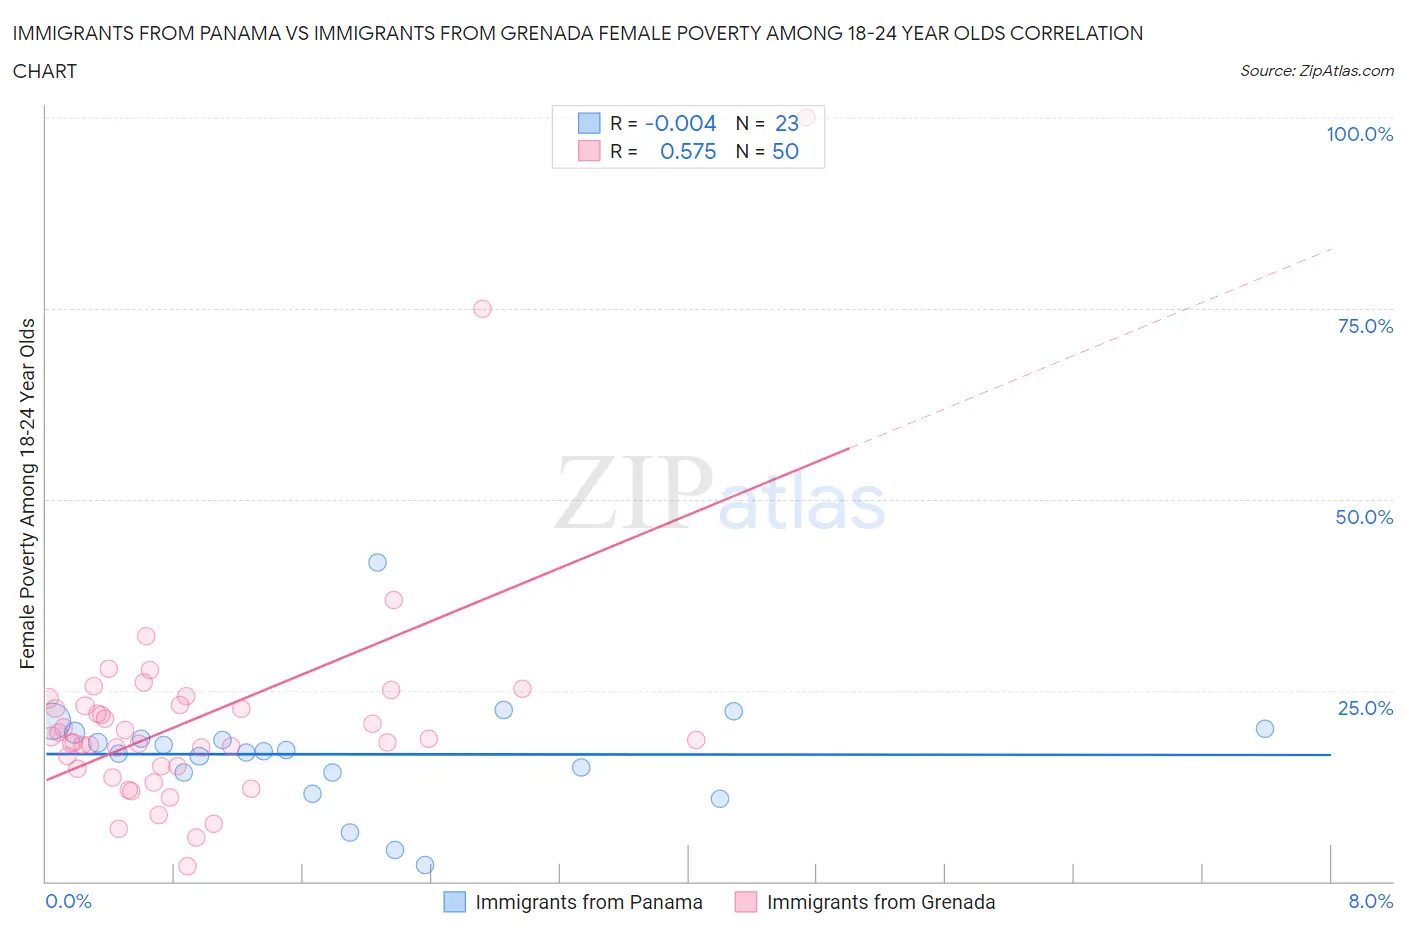 Immigrants from Panama vs Immigrants from Grenada Female Poverty Among 18-24 Year Olds